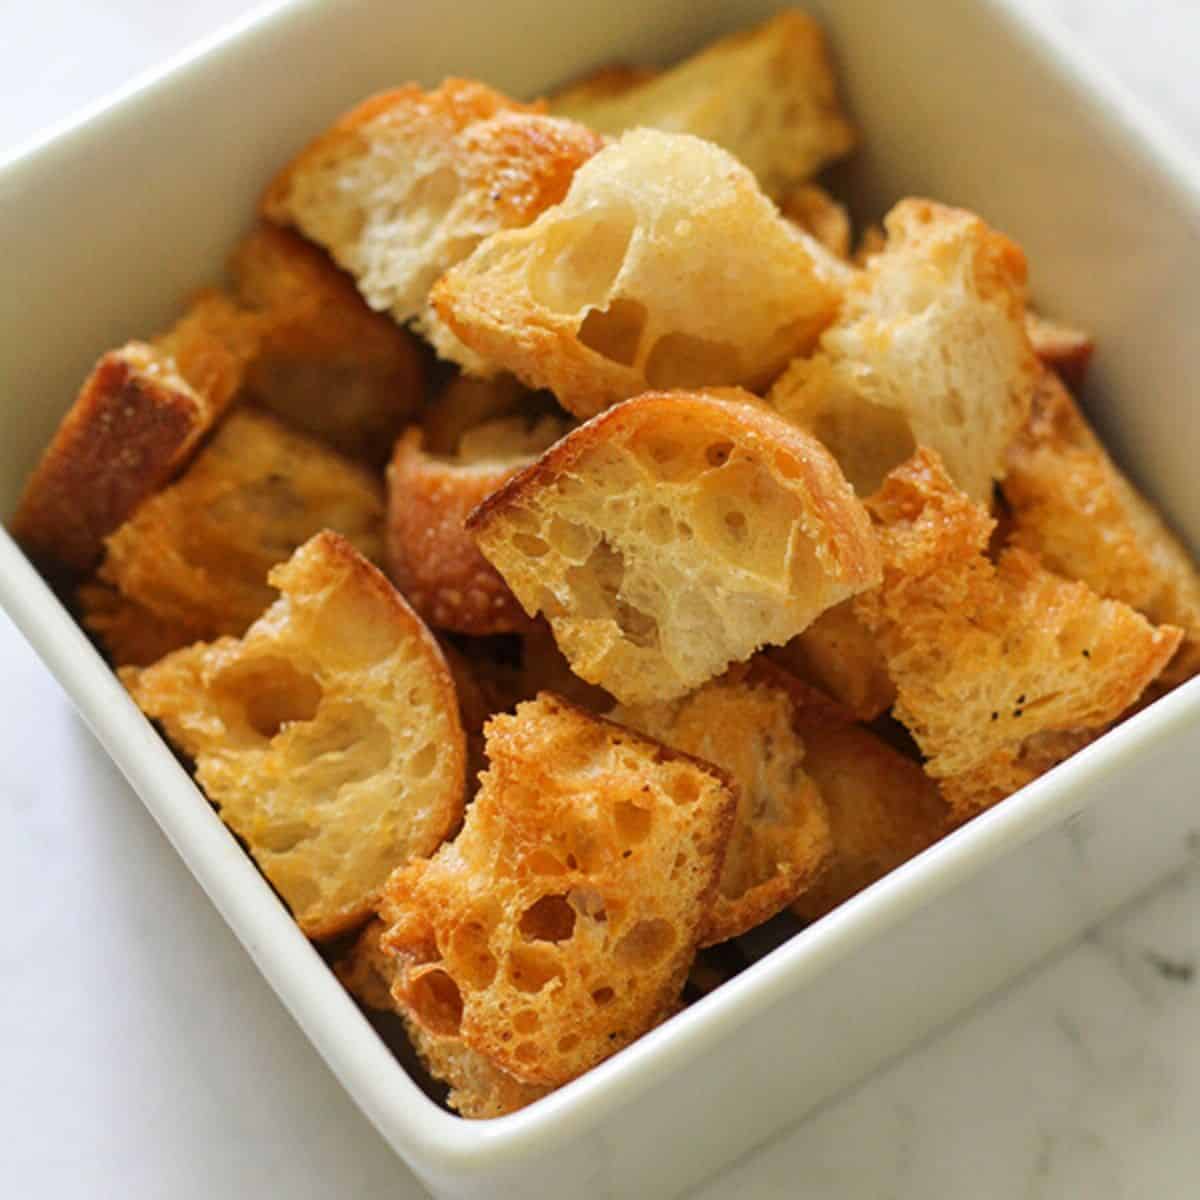 How to Make Croutons in Air Fryer